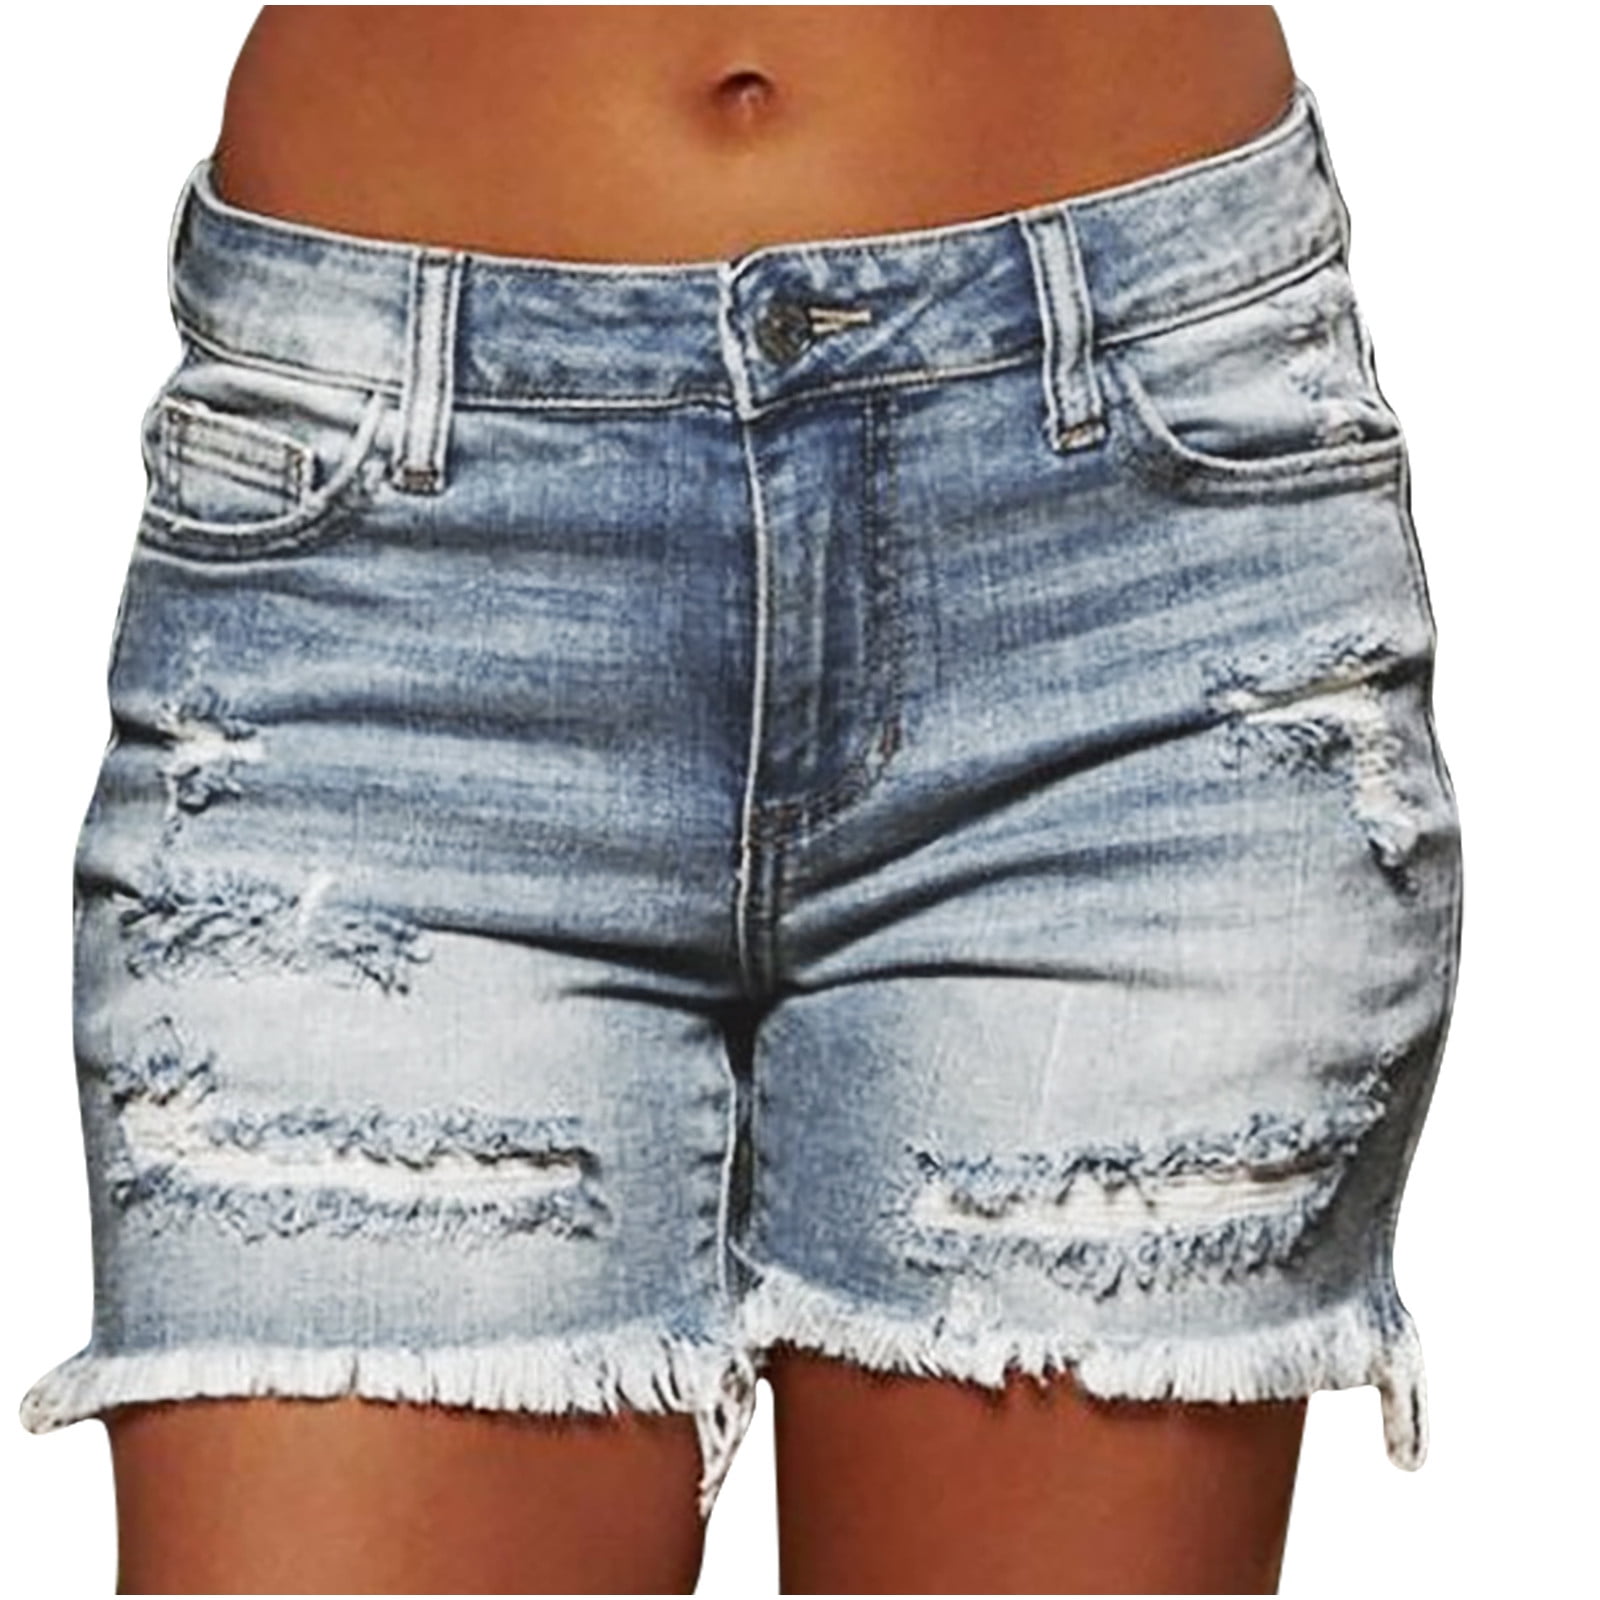 YYDGH Womens Denim Shorts Casual Summer High Waisted Ripped Jean Shorts  Distressed Stretch Vintage Juniors Hot Shorts Blue M 